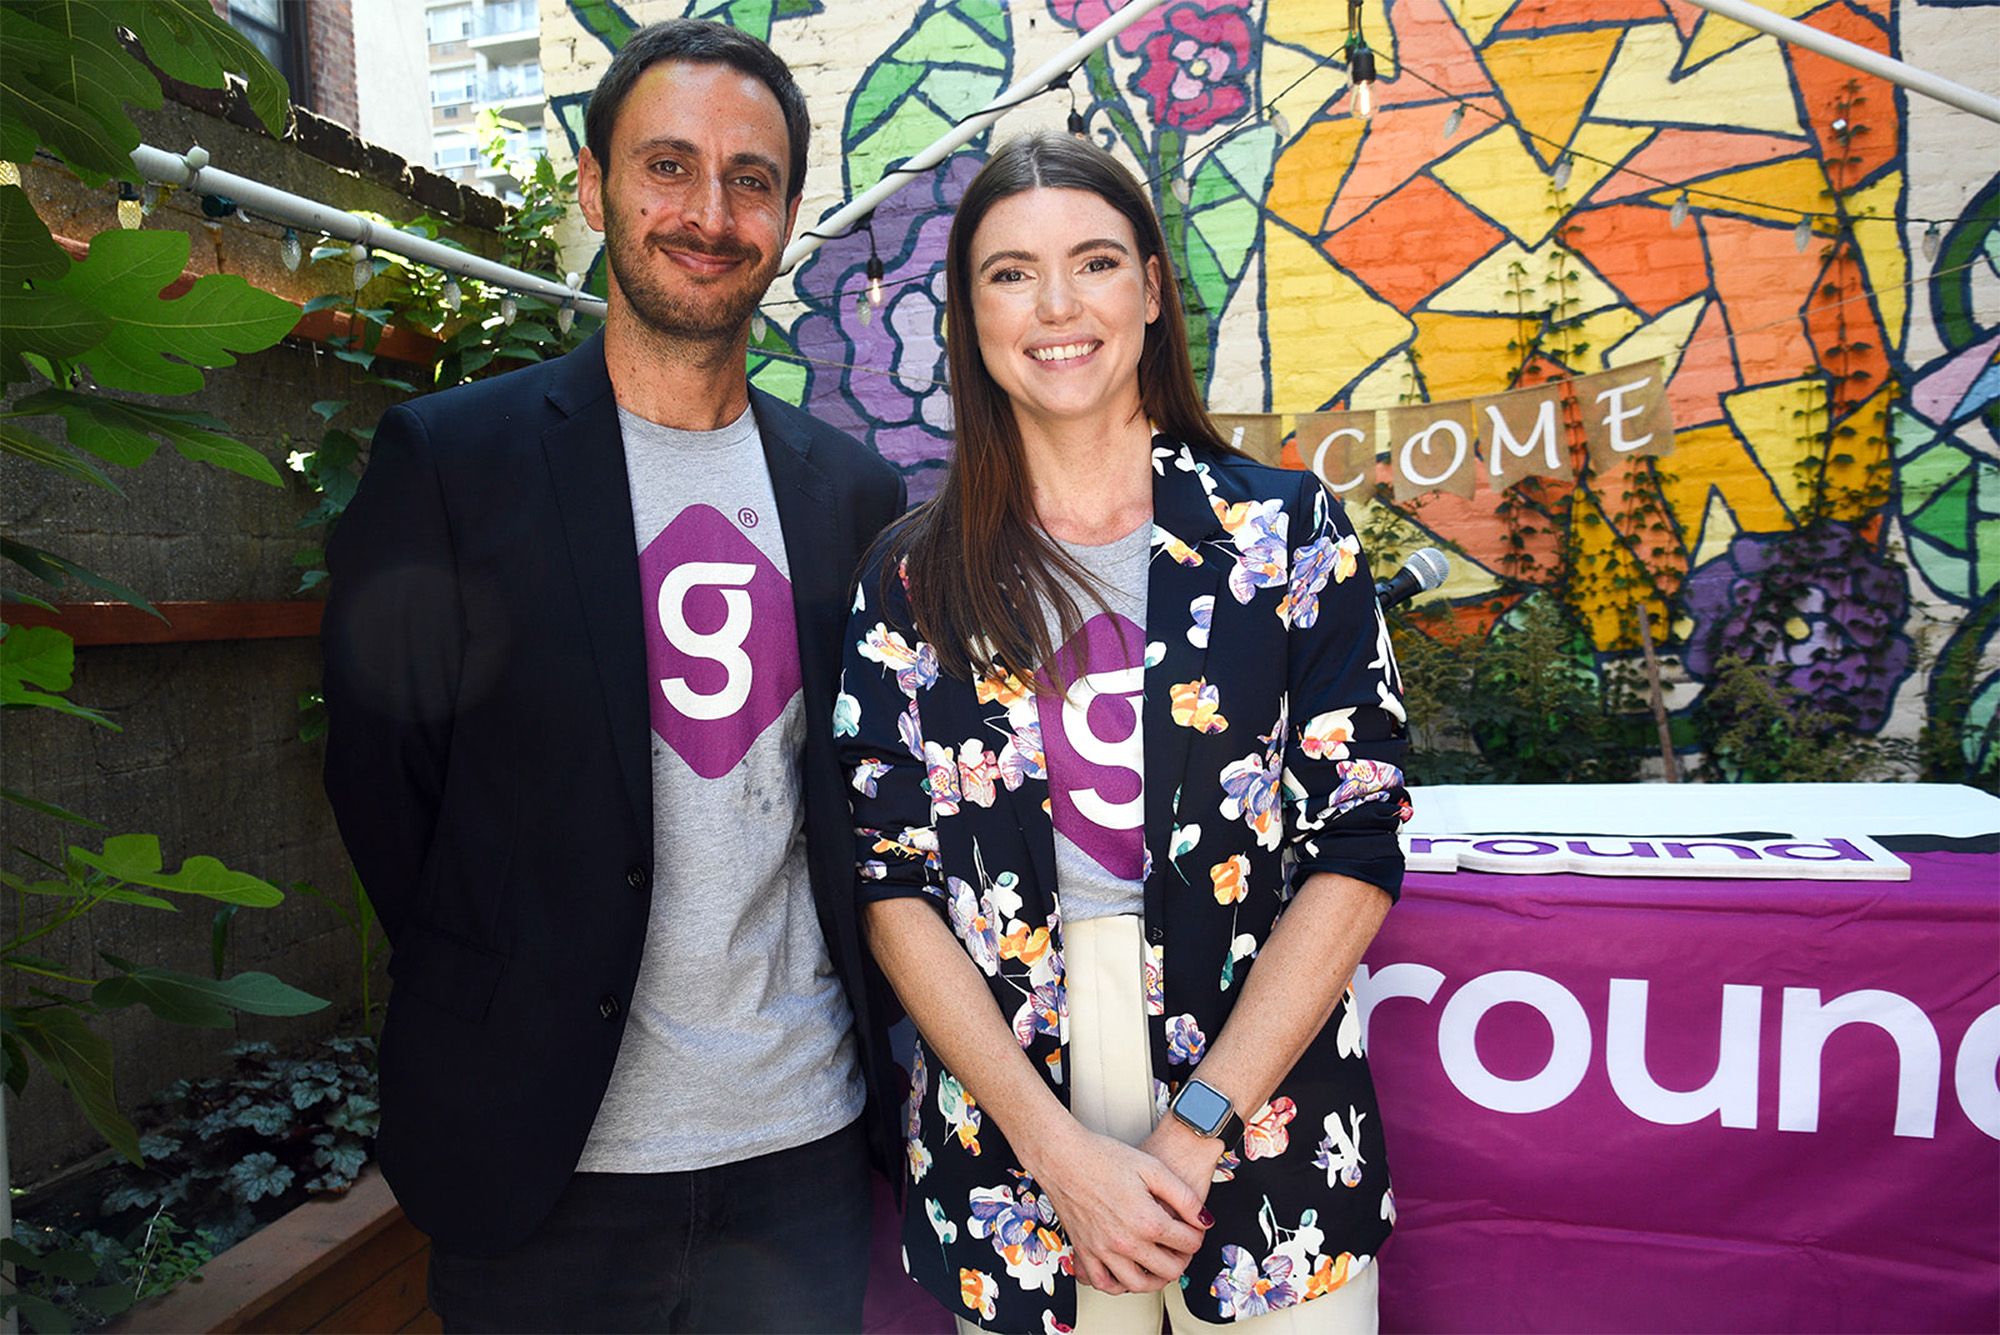 From left: Luke Entelis, Getaround Policy Manager, and Adrienne Moretz, Manager of Government Partnerships at Getaround.